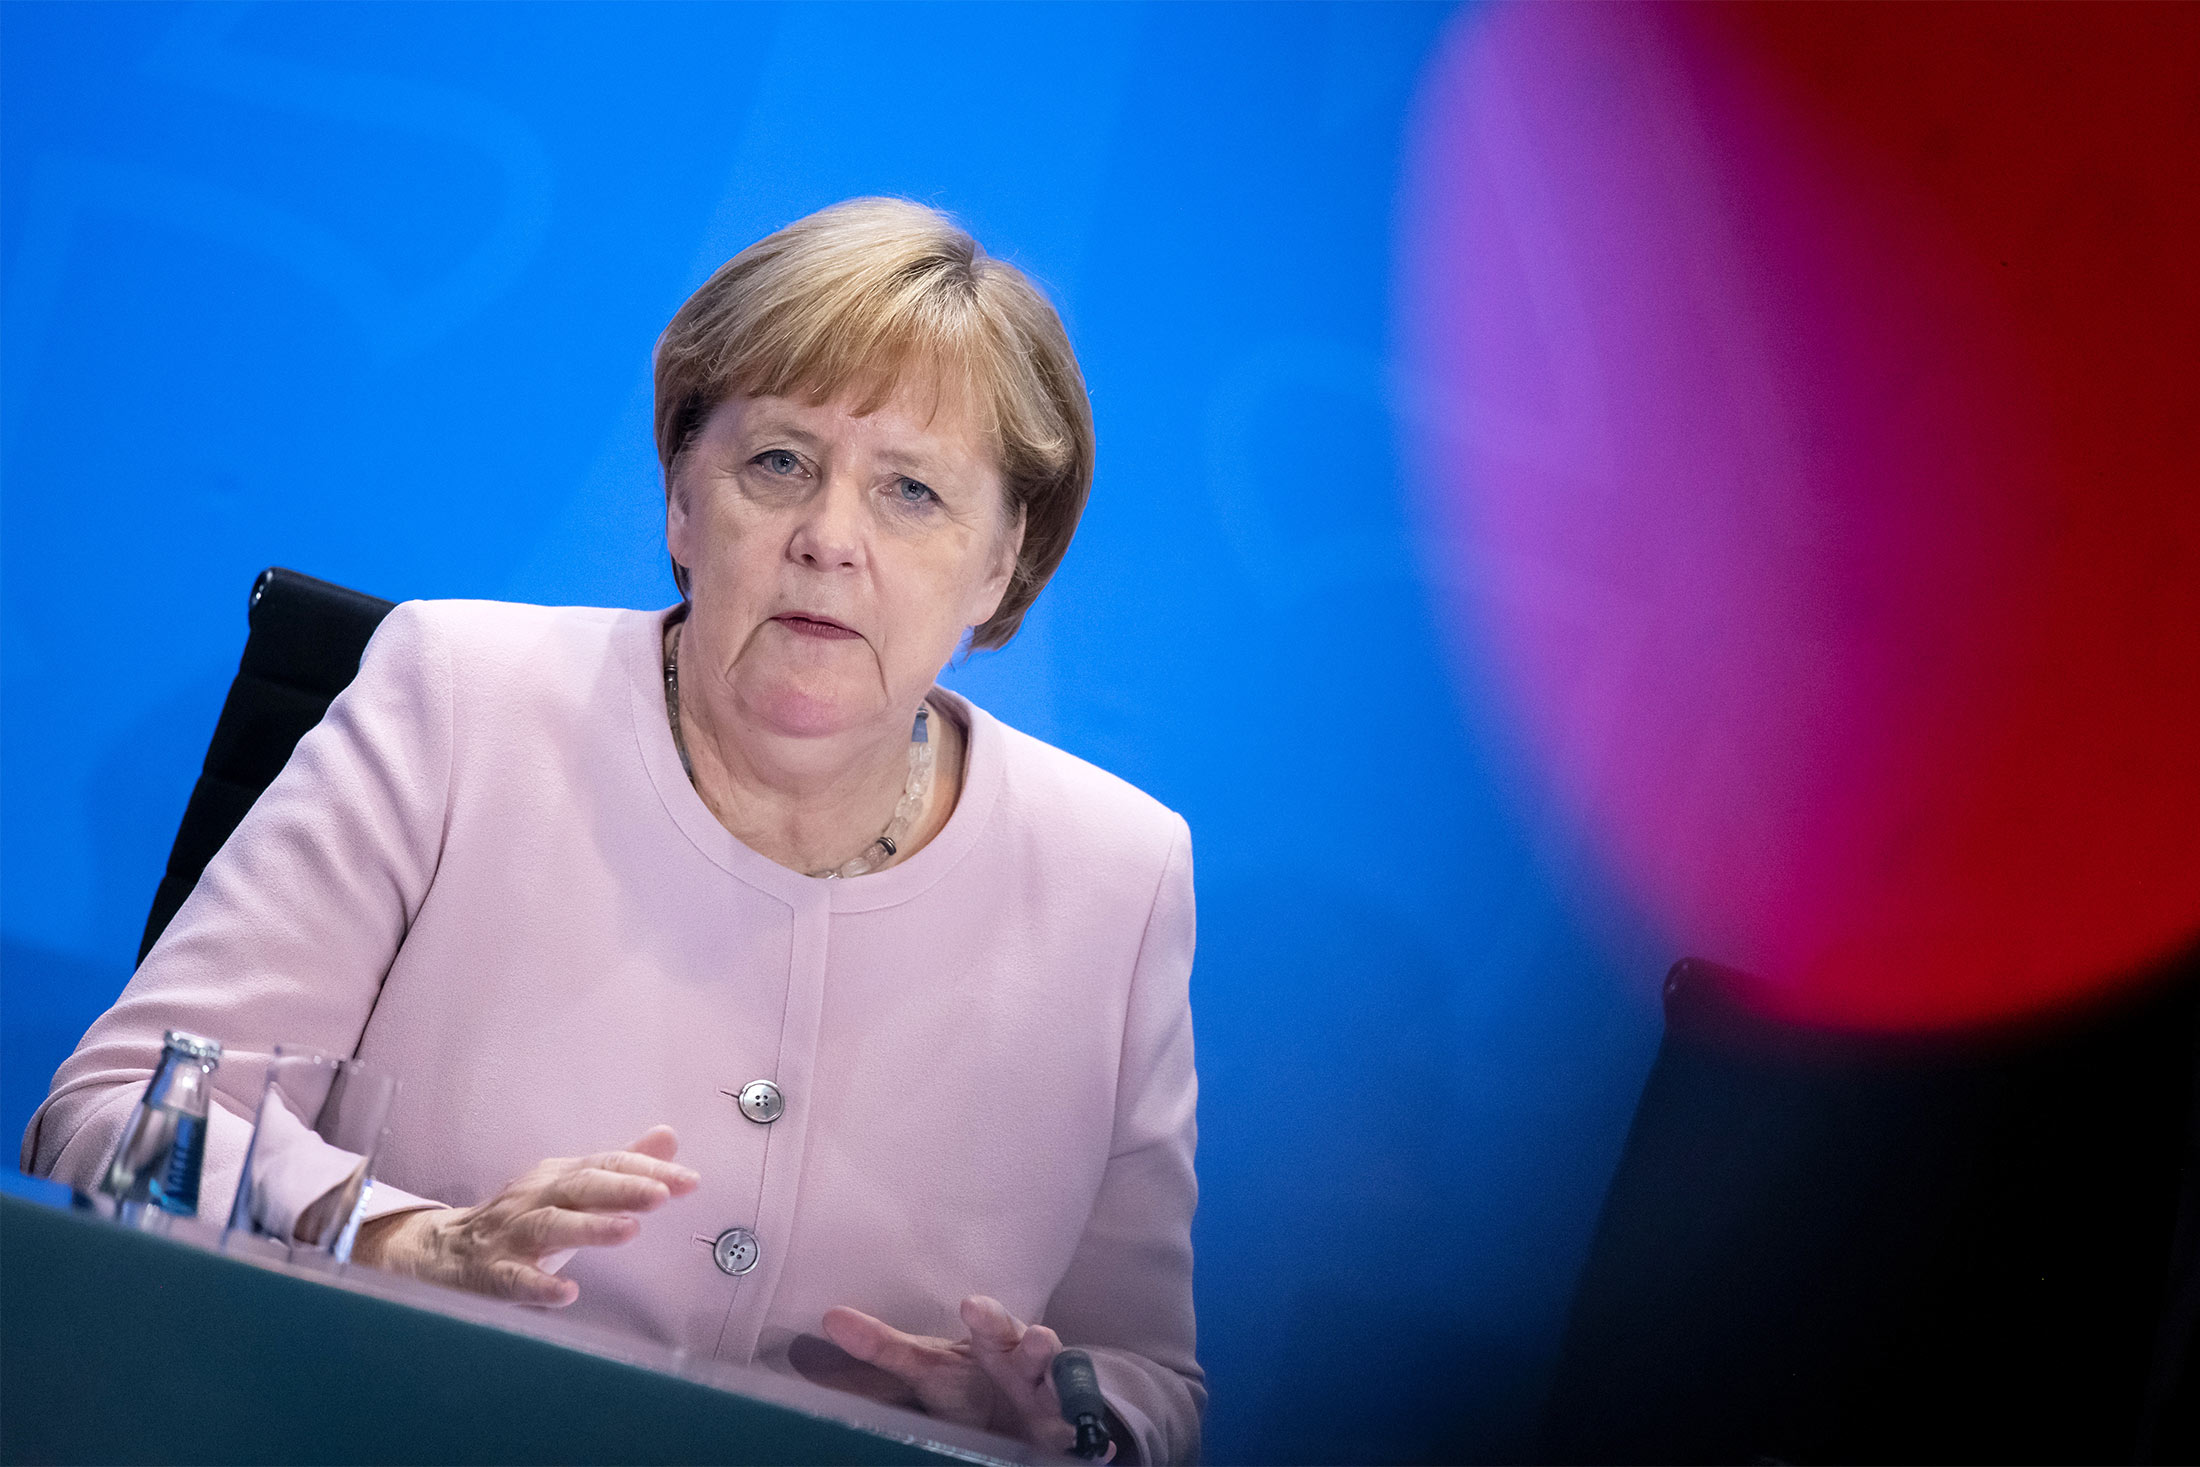 Germany Was 'Not Good Enough' on Climate Change, Merkel Says - Bloomberg